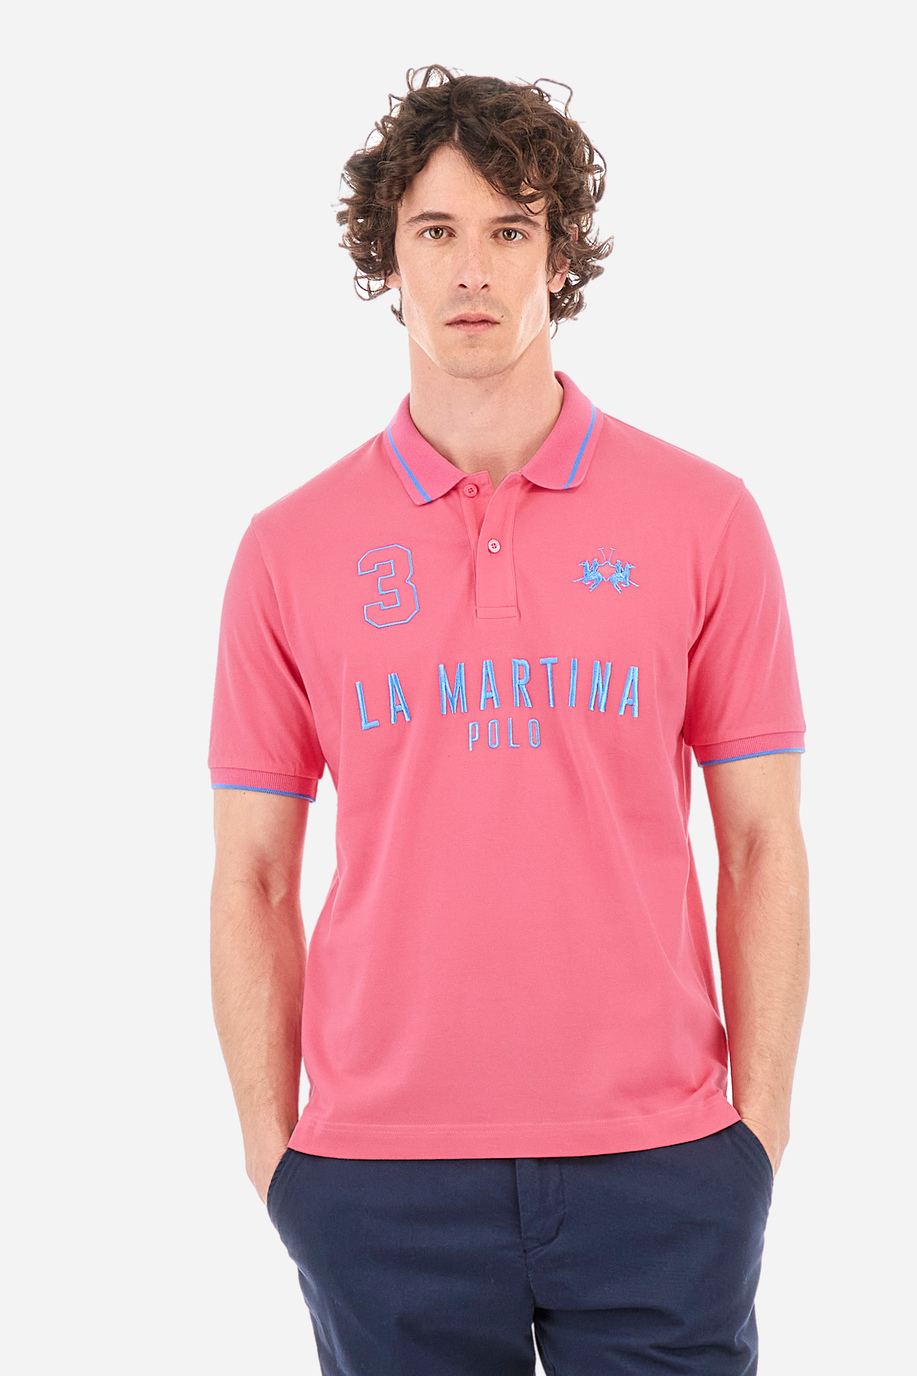 Regular-fit polo shirt in elasticated cotton - Yeshayahu - New Arrivals Men | La Martina - Official Online Shop